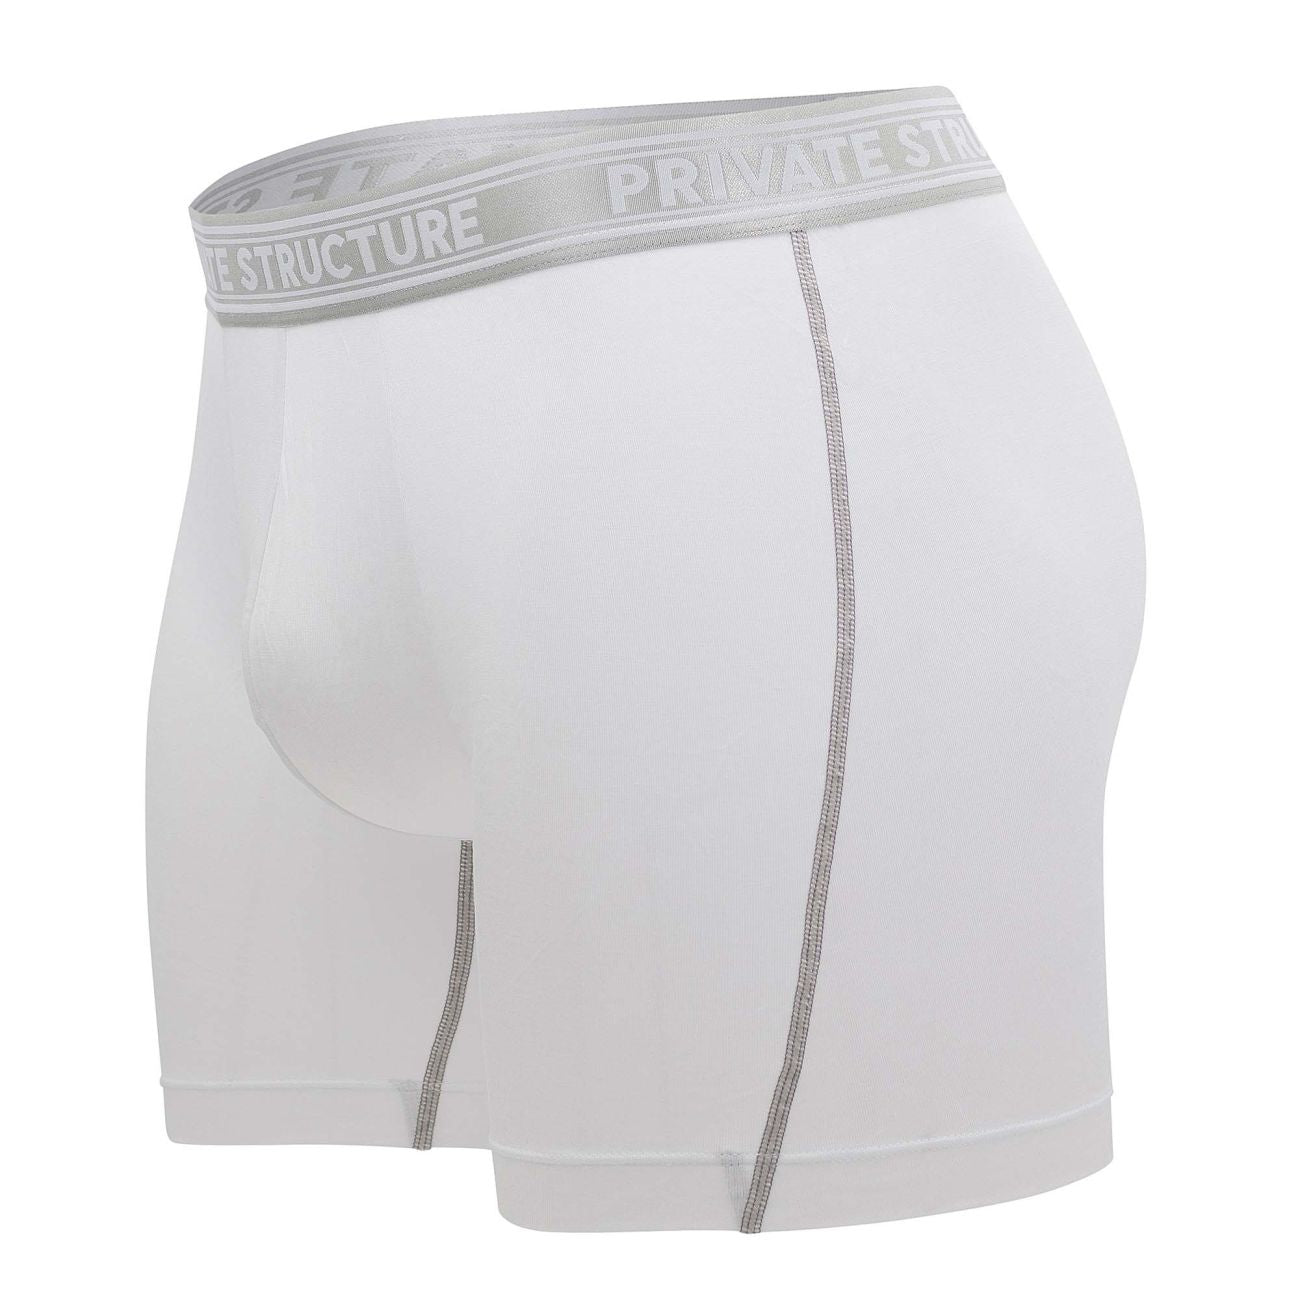 Private Structure PBUT4380 Bamboo Mid Waist Boxer Briefs Bright White